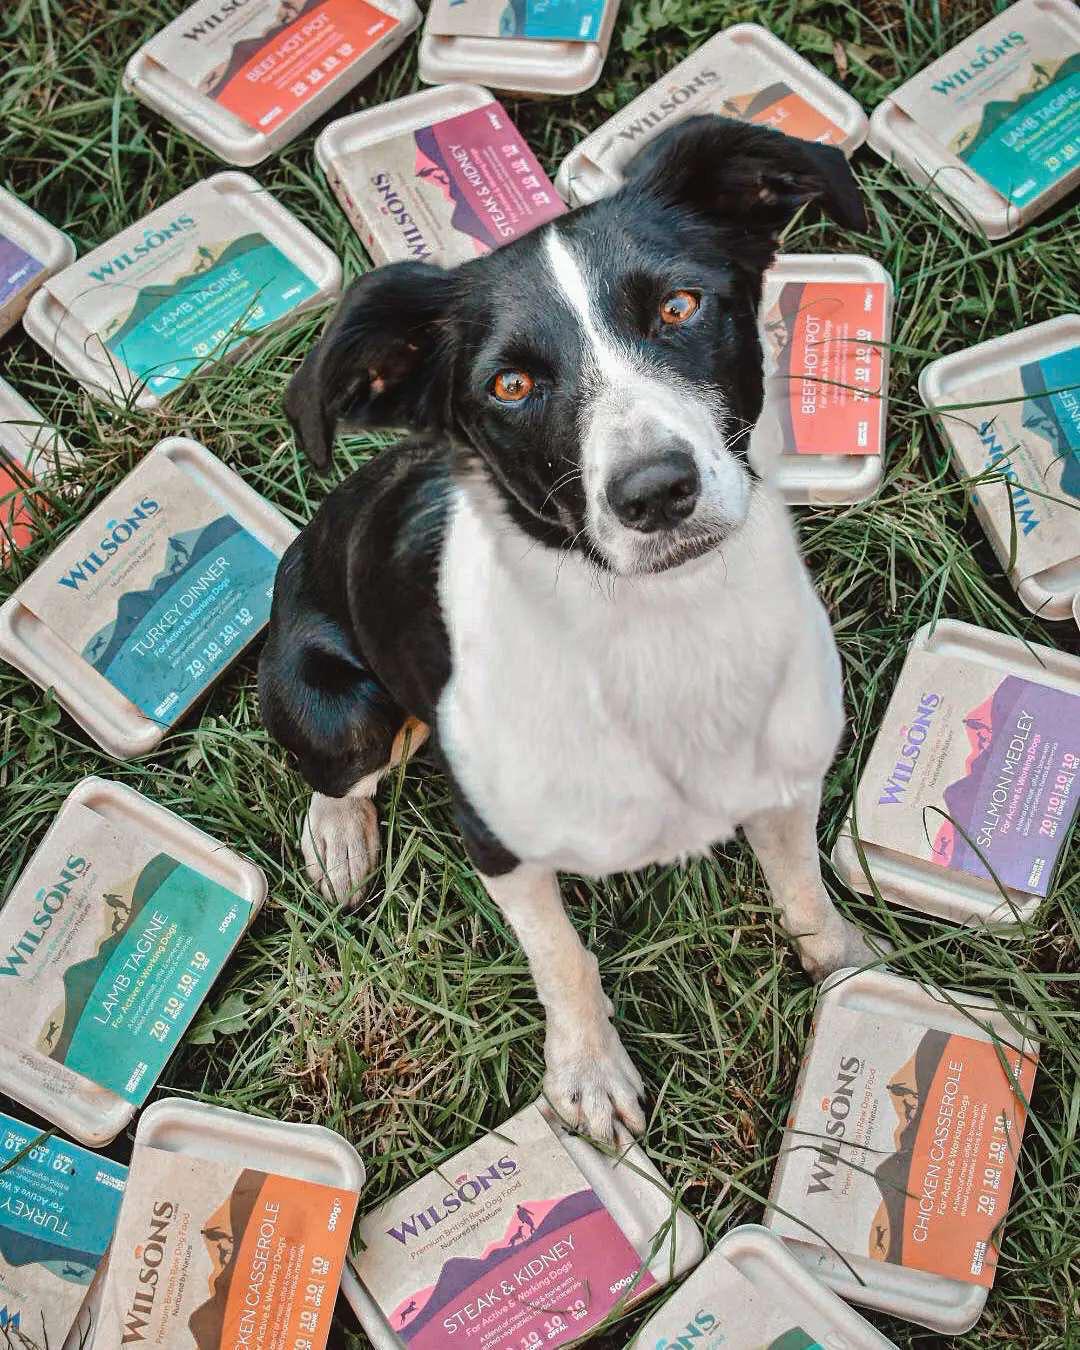 Wilsons Pet Food are champions of compostable packaging